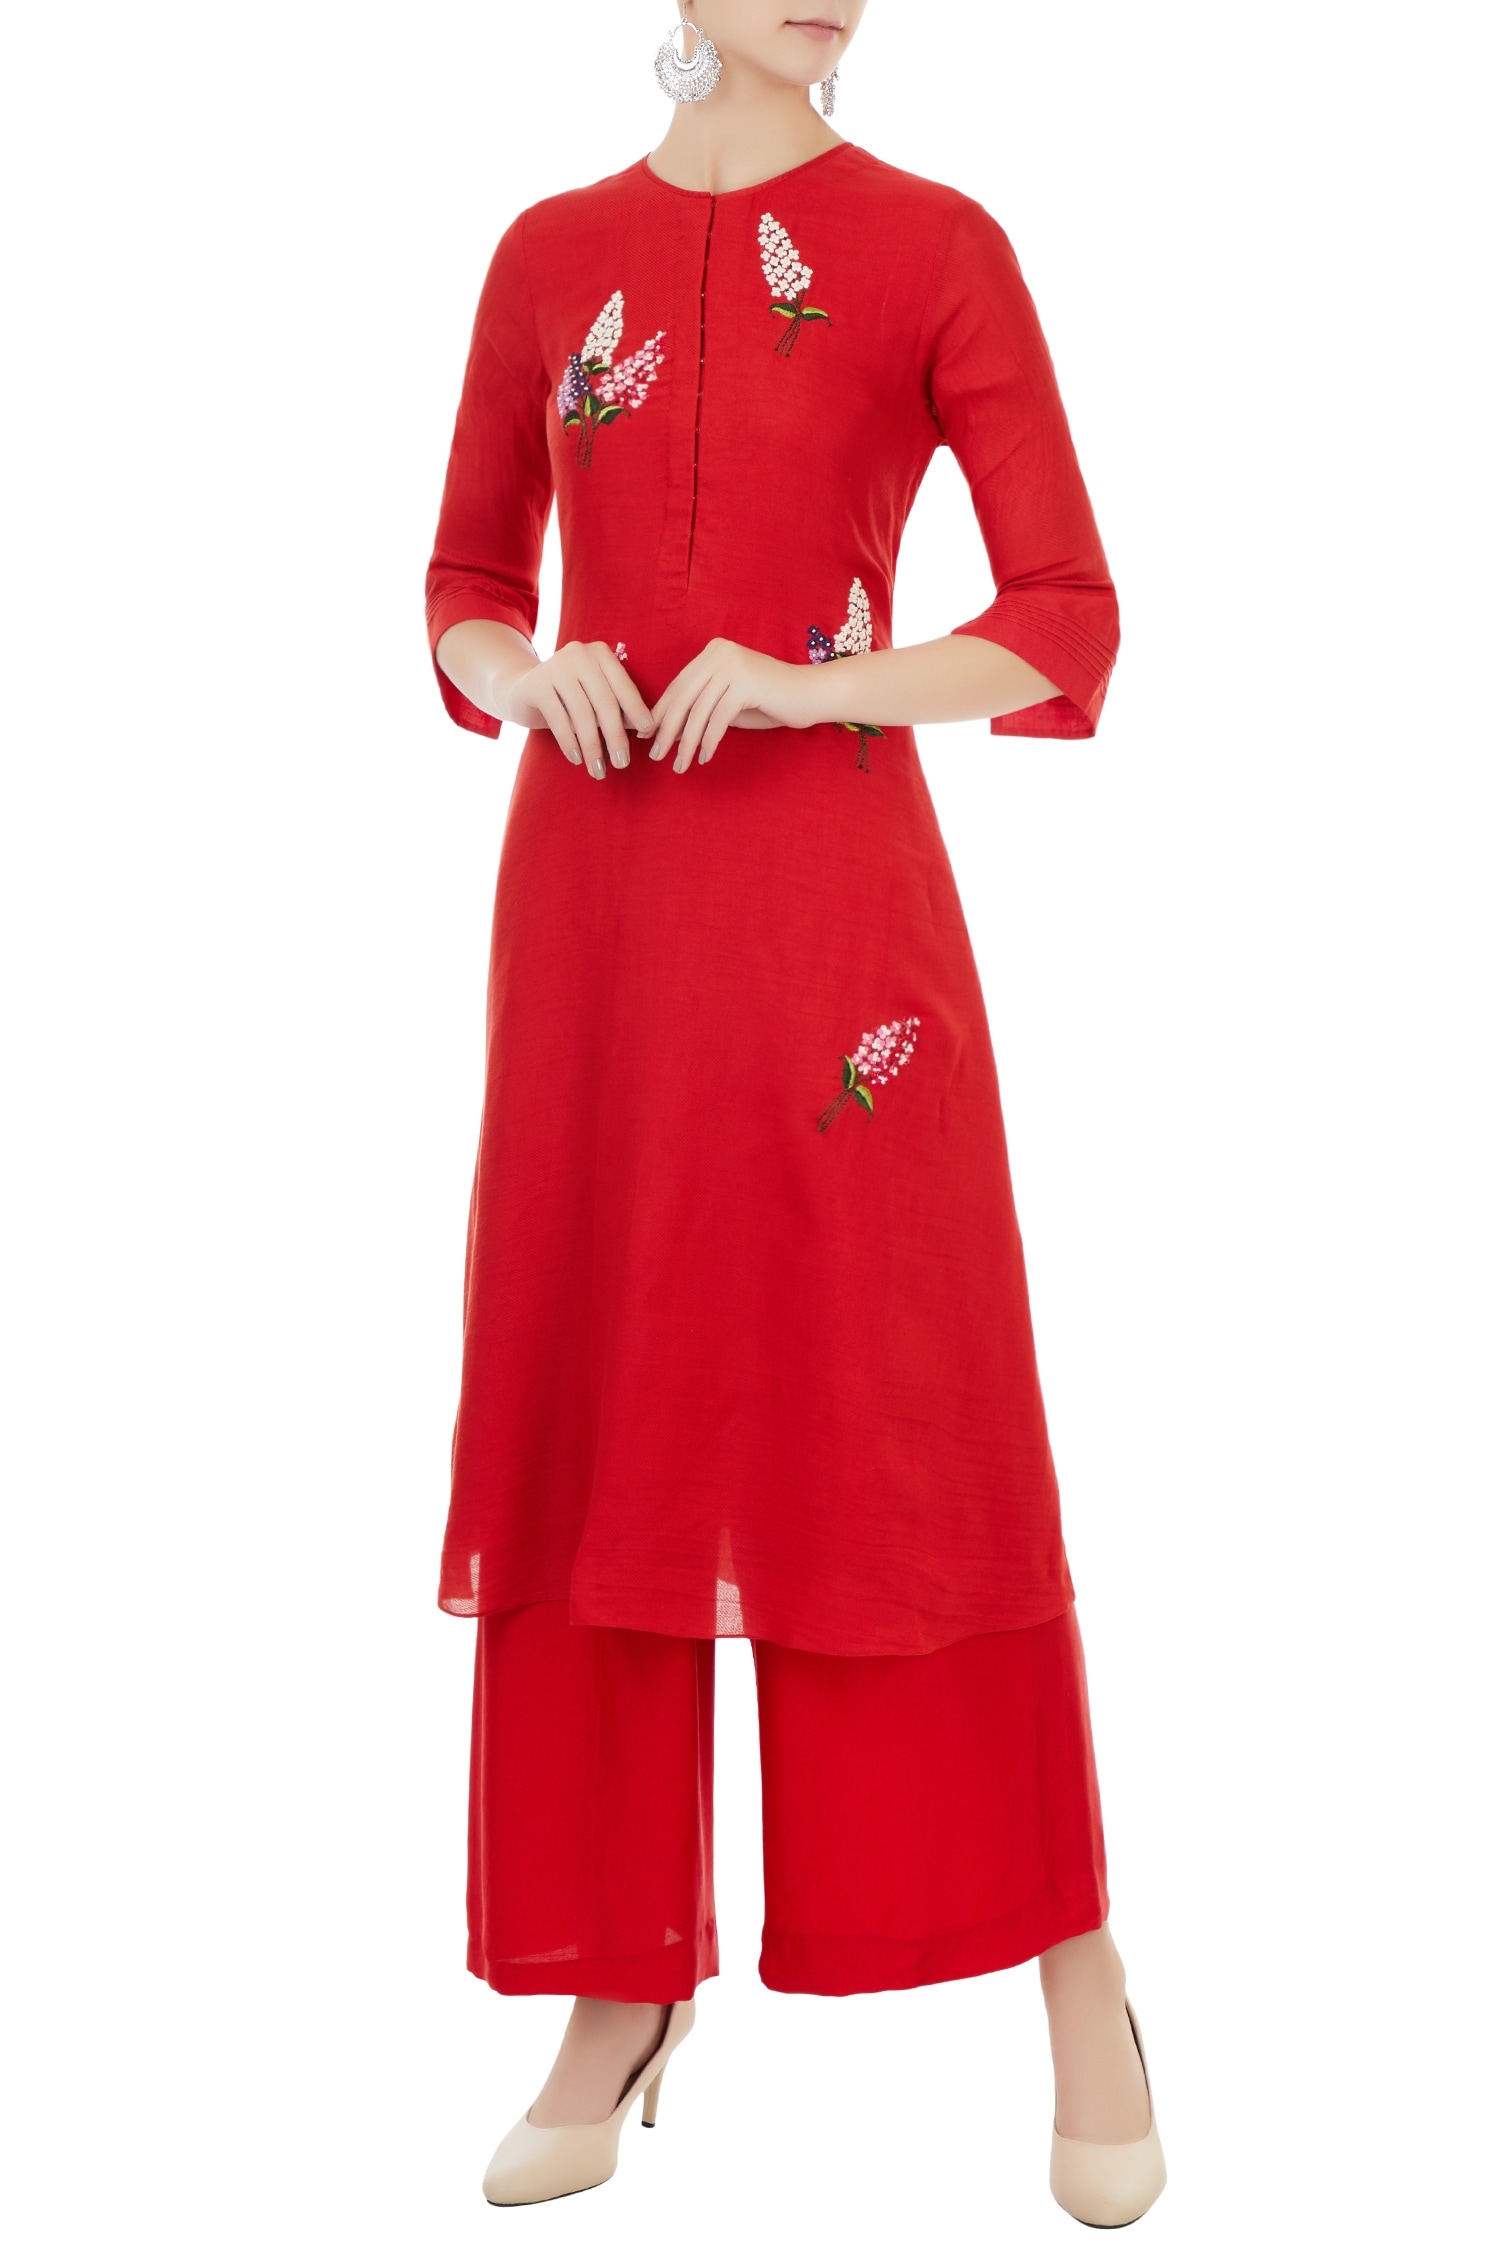 Desert Shine by Sulochana Jangir Red Linen Georgette Embroidered Floral Motifs Kurta And Palazzo Set For Women